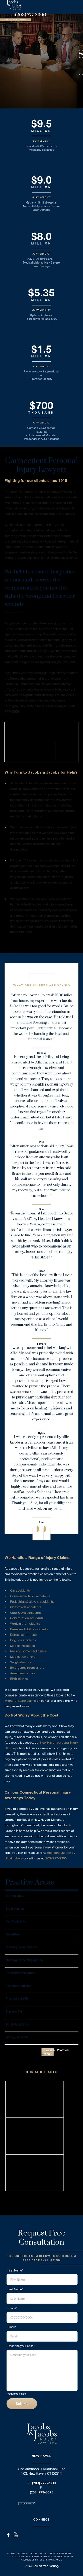 Jacobs & Jacobs, LLC - New Haven CT Lawyers